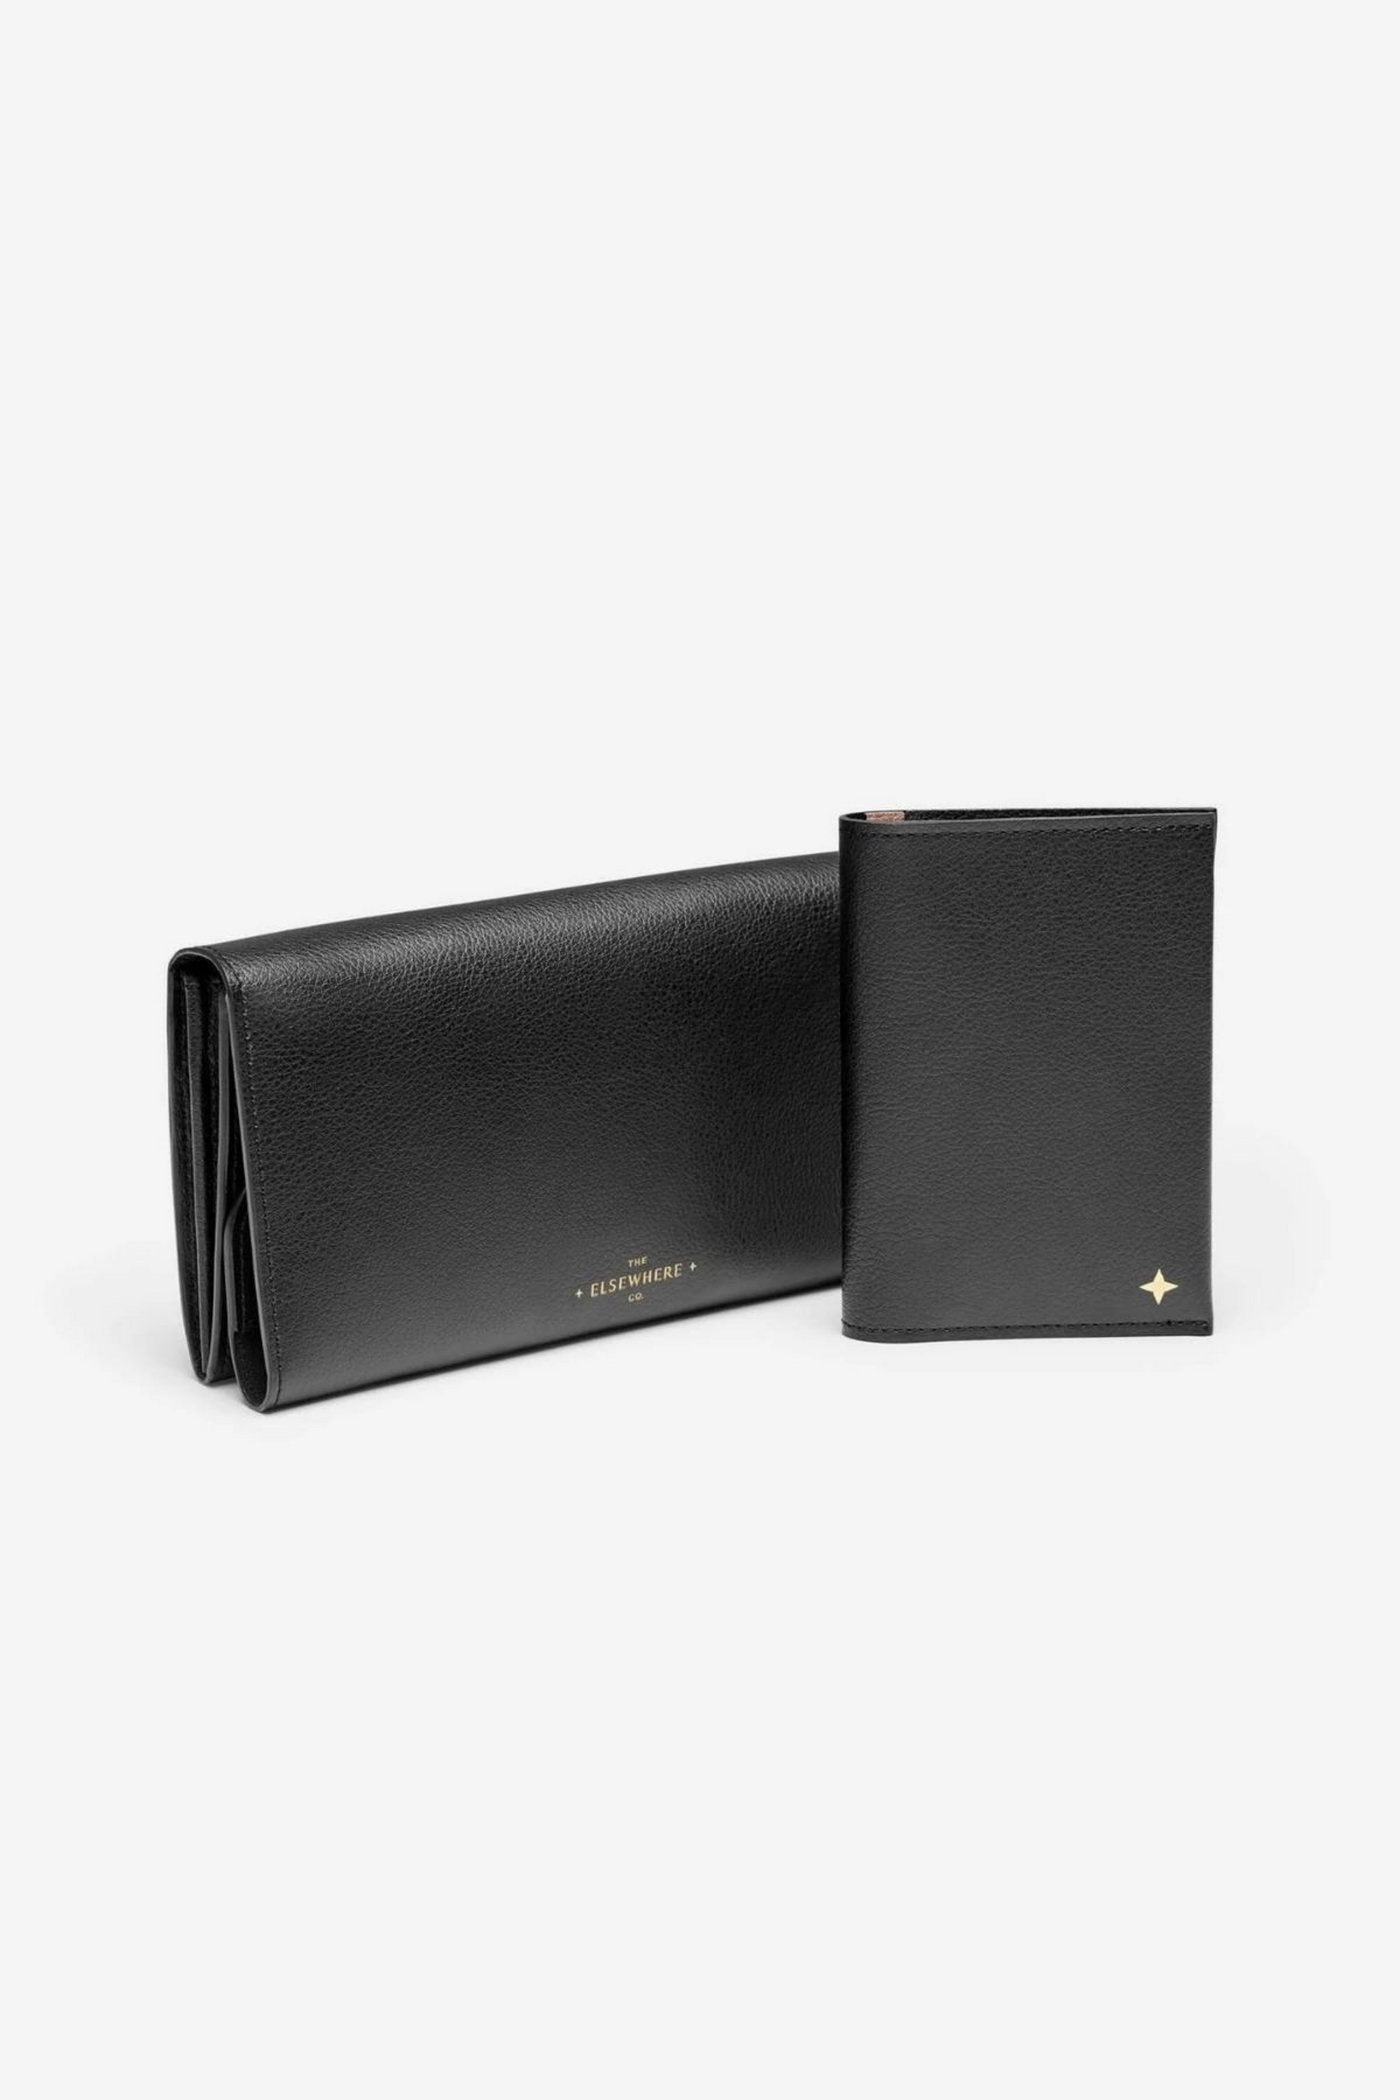 The Elsewhere Co. Travel Wallet Set in Nightfall Black, available on ZERRIN with free Singapore shipping